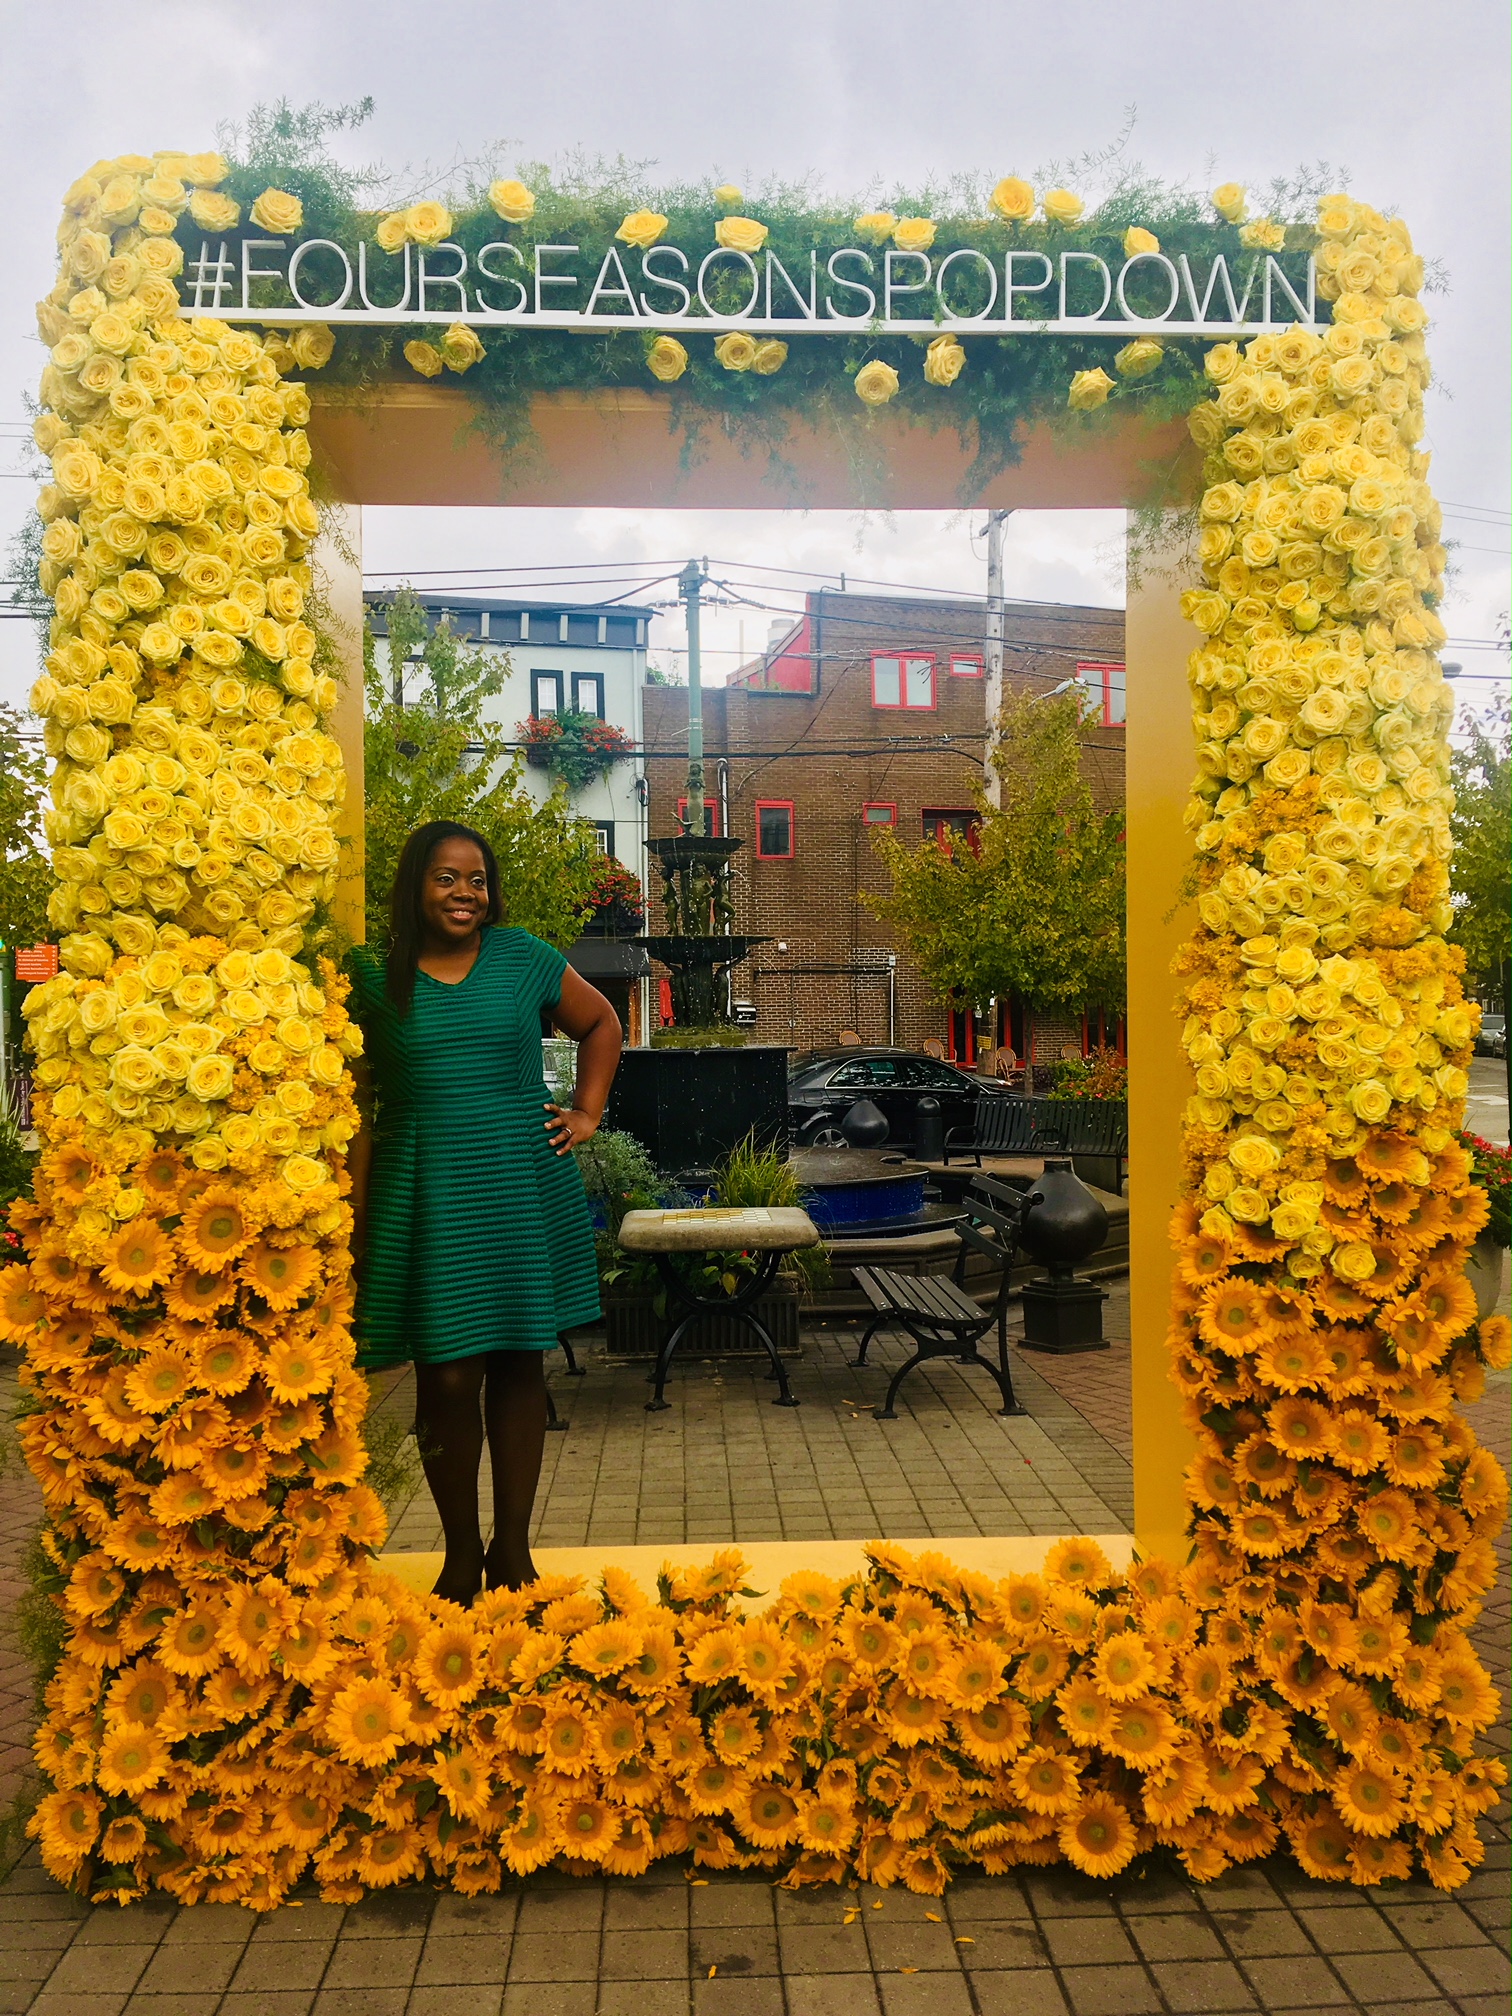 InspireDesign Digital Content Editor Corris Little stops to smell the flowers at an installation designed by celebrity florist Jeff Leatham.